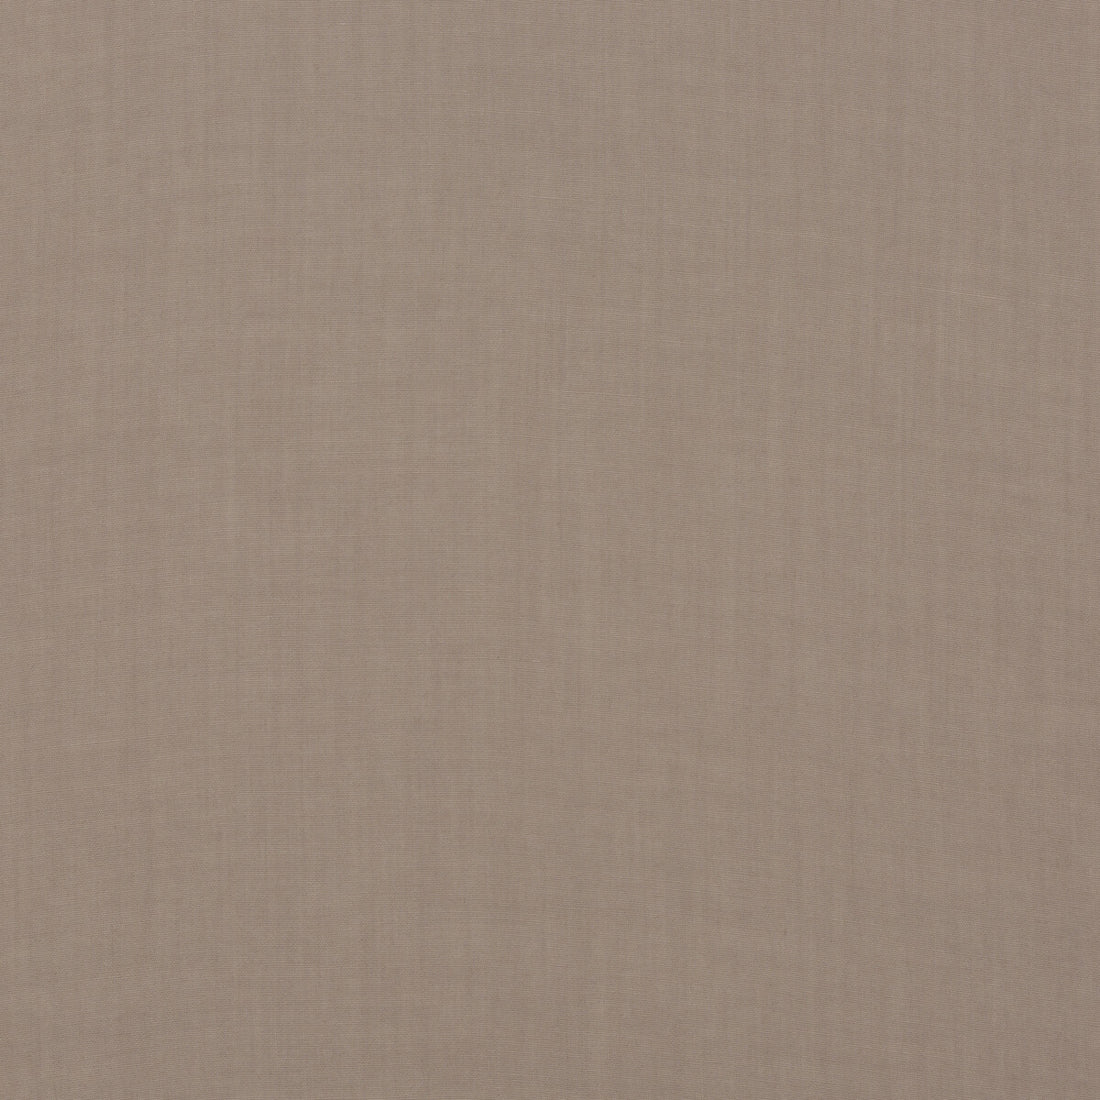 Meridian Linen fabric in blush color - pattern ED85281.440.0 - by Threads in the Meridian collection